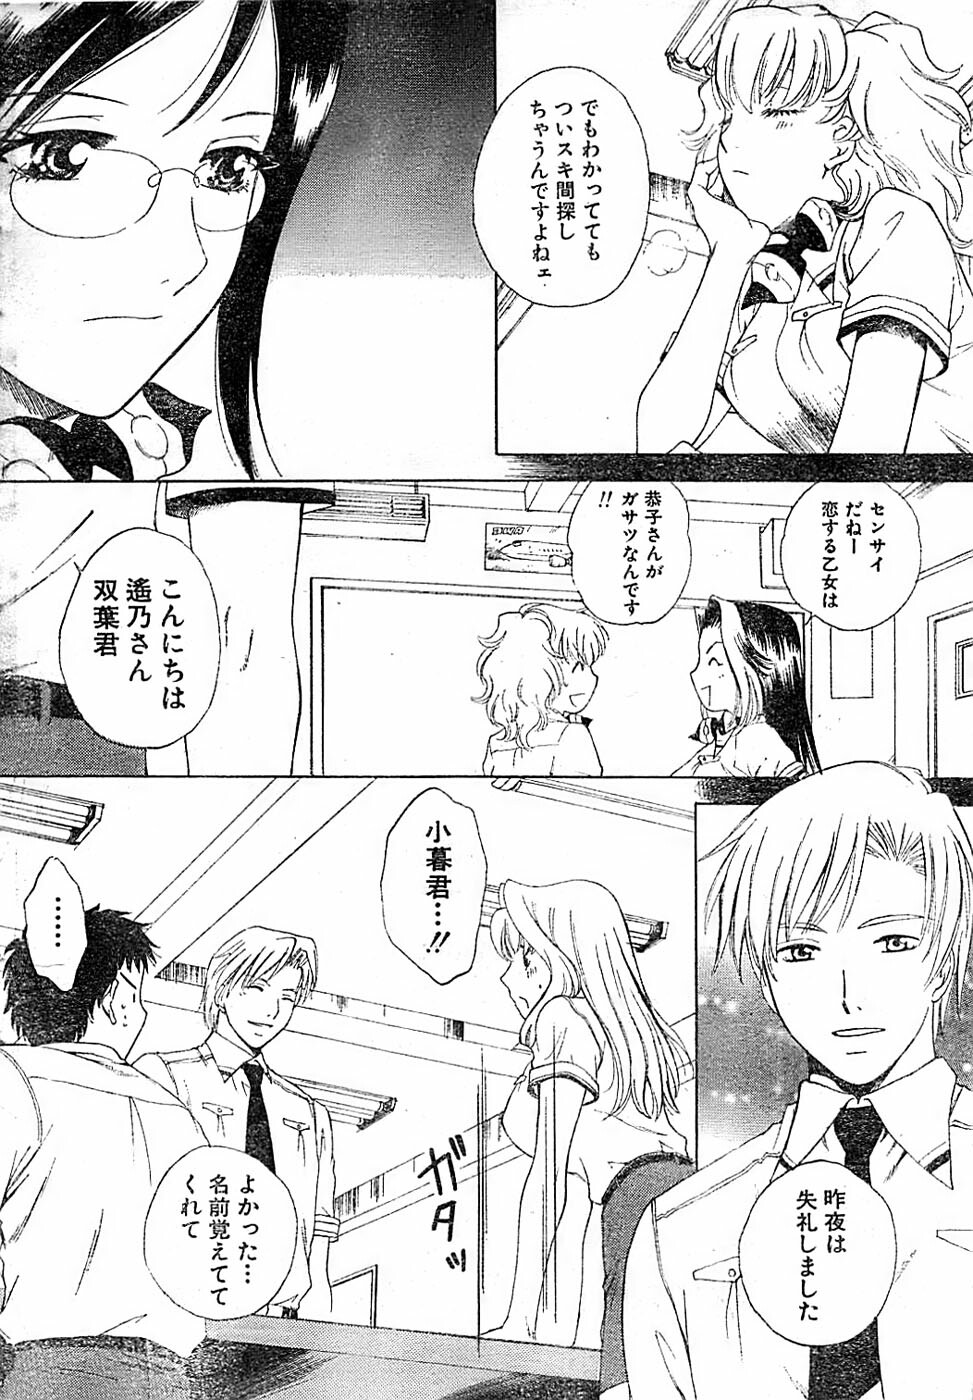 Doki! Special 2006-04 page 20 full